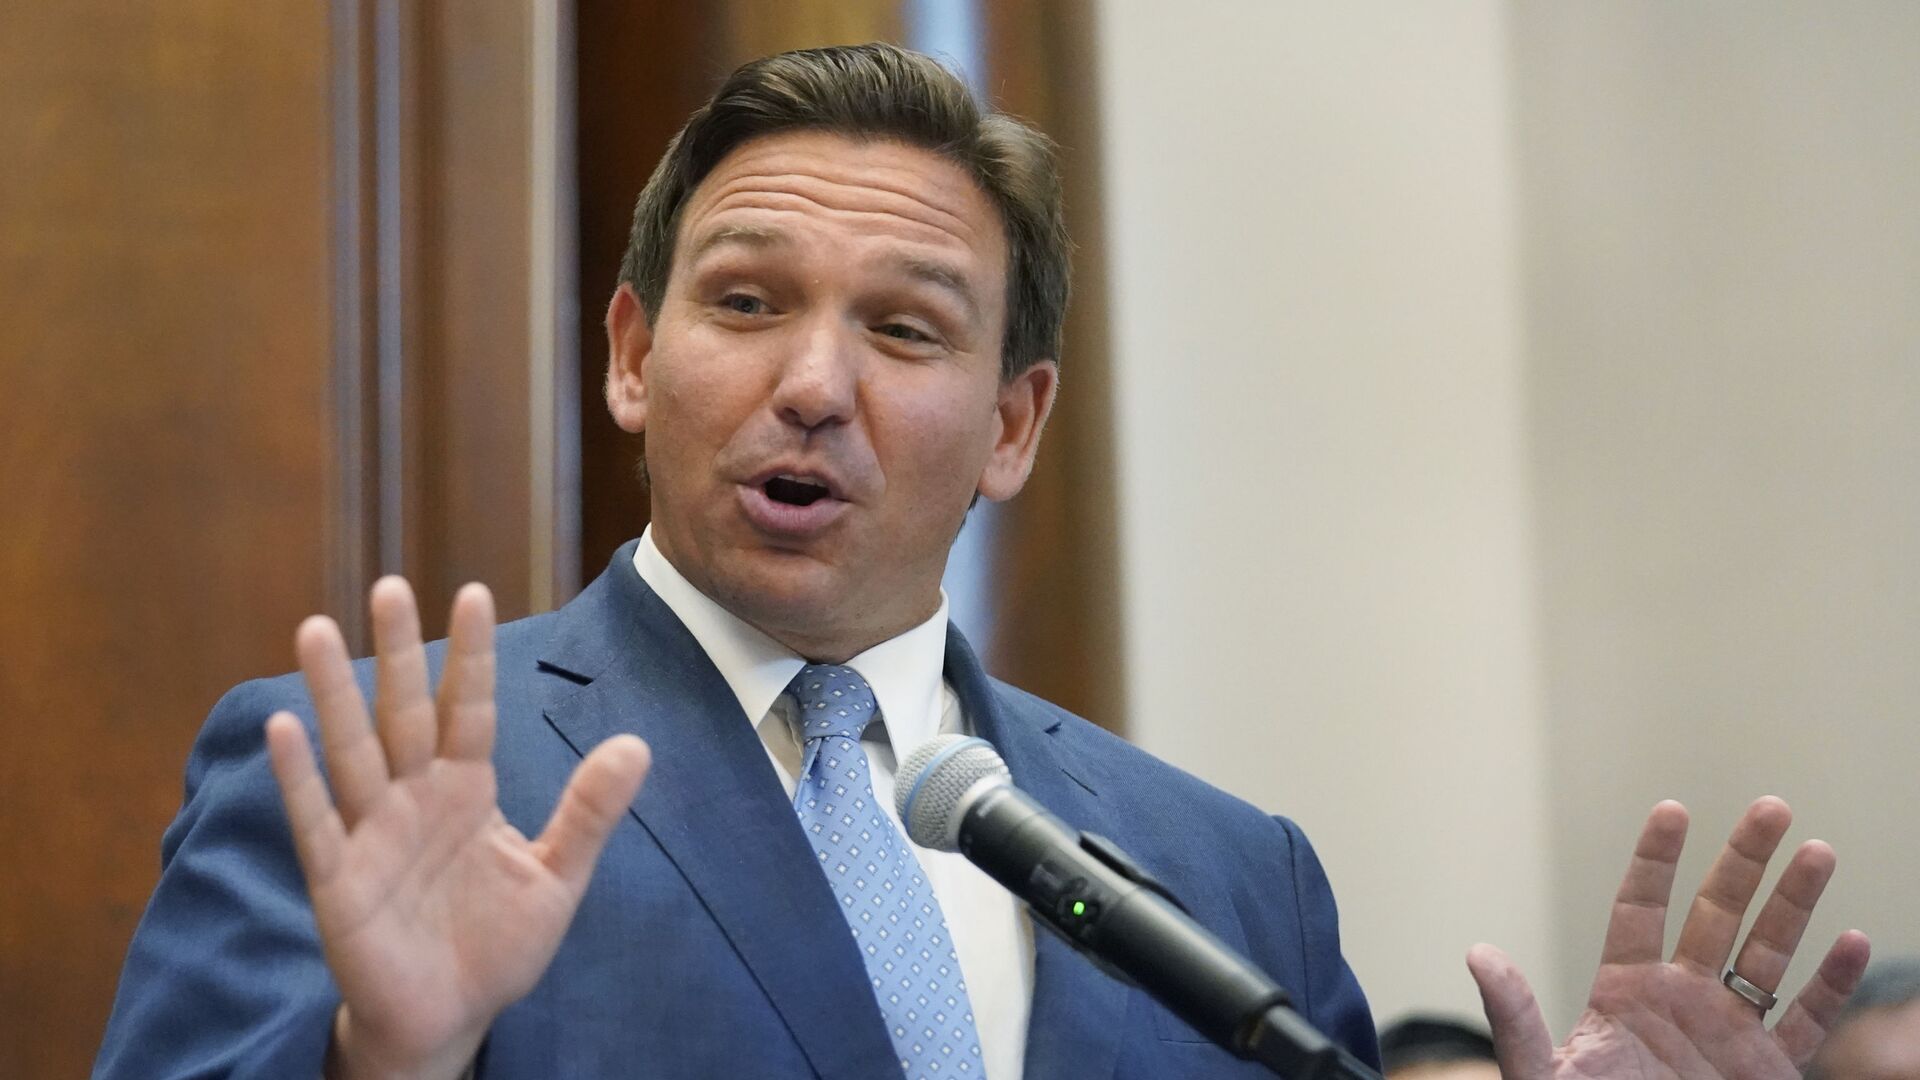 Florida Gov. Ron DeSantis gestures as he speaks, Monday, June 14, 2021, at the Shul of Bal Harbour, a Jewish community center in Surfside, Fla. DeSantis visited the South Florida temple to denounce anti-Semitism and stand with Israel, while signing a bill into law that would require public schools in his state to set aside moments of silence for children to meditate or pray - Sputnik International, 1920, 04.01.2022